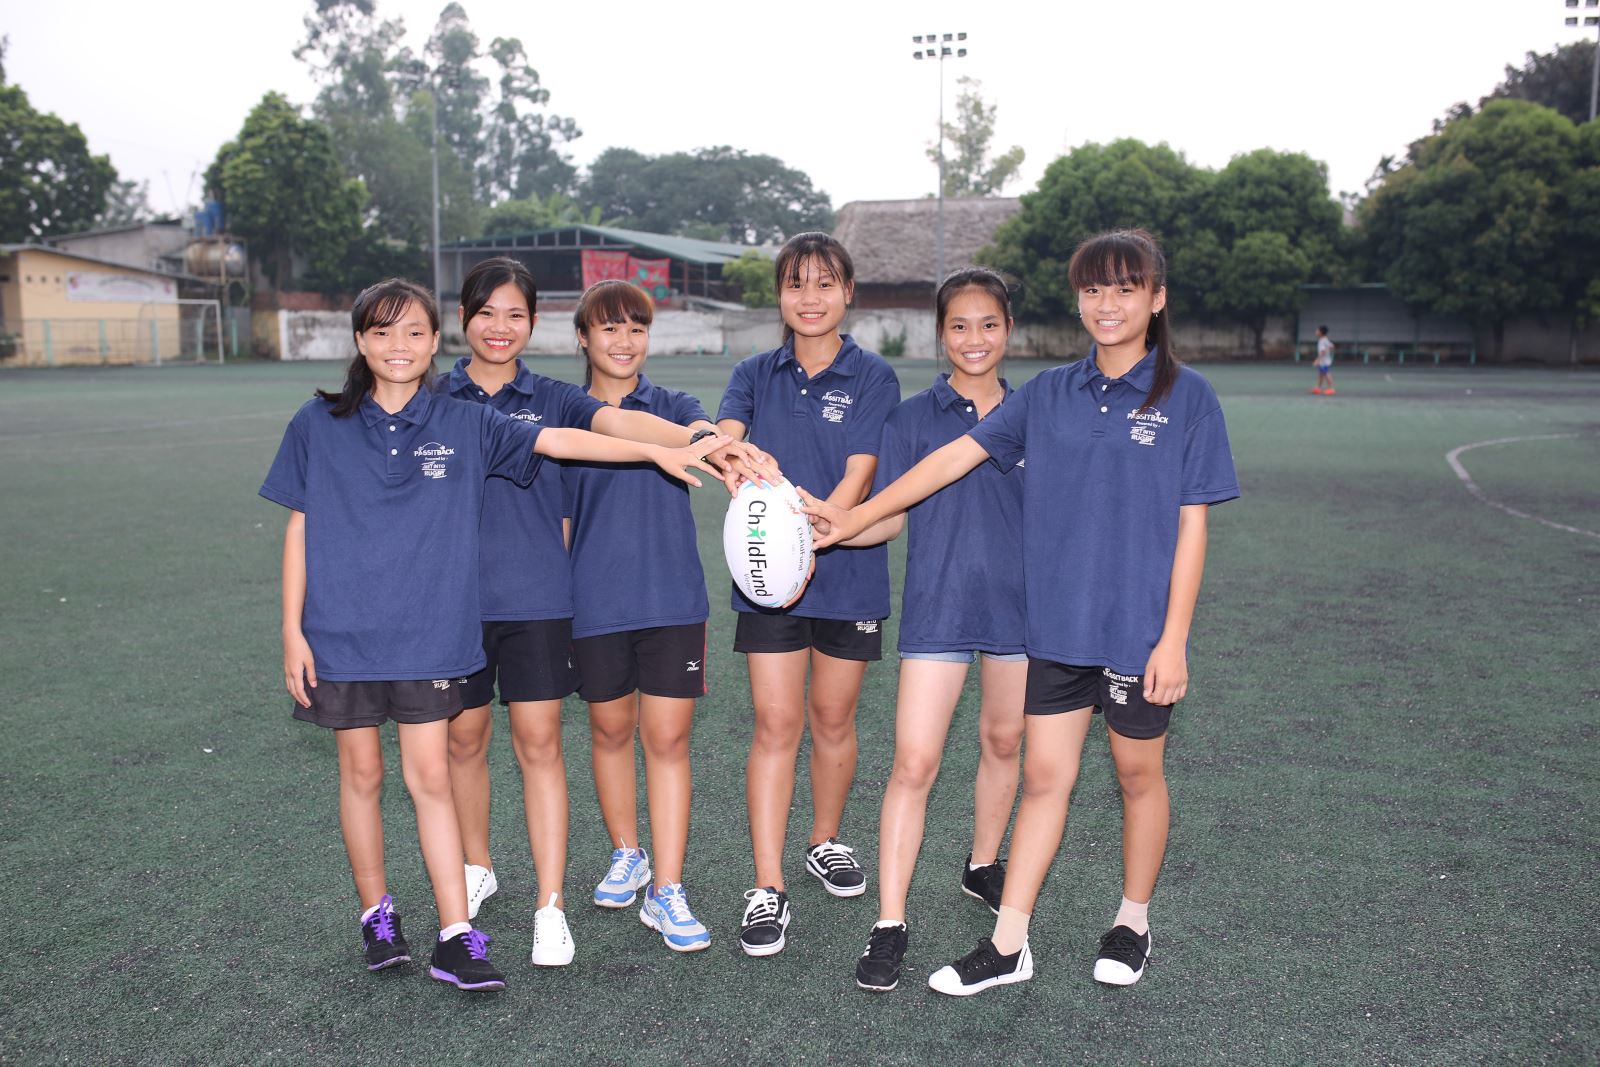 ChildFund Pass It Back progam proves sport has power to remove barriers in Asia